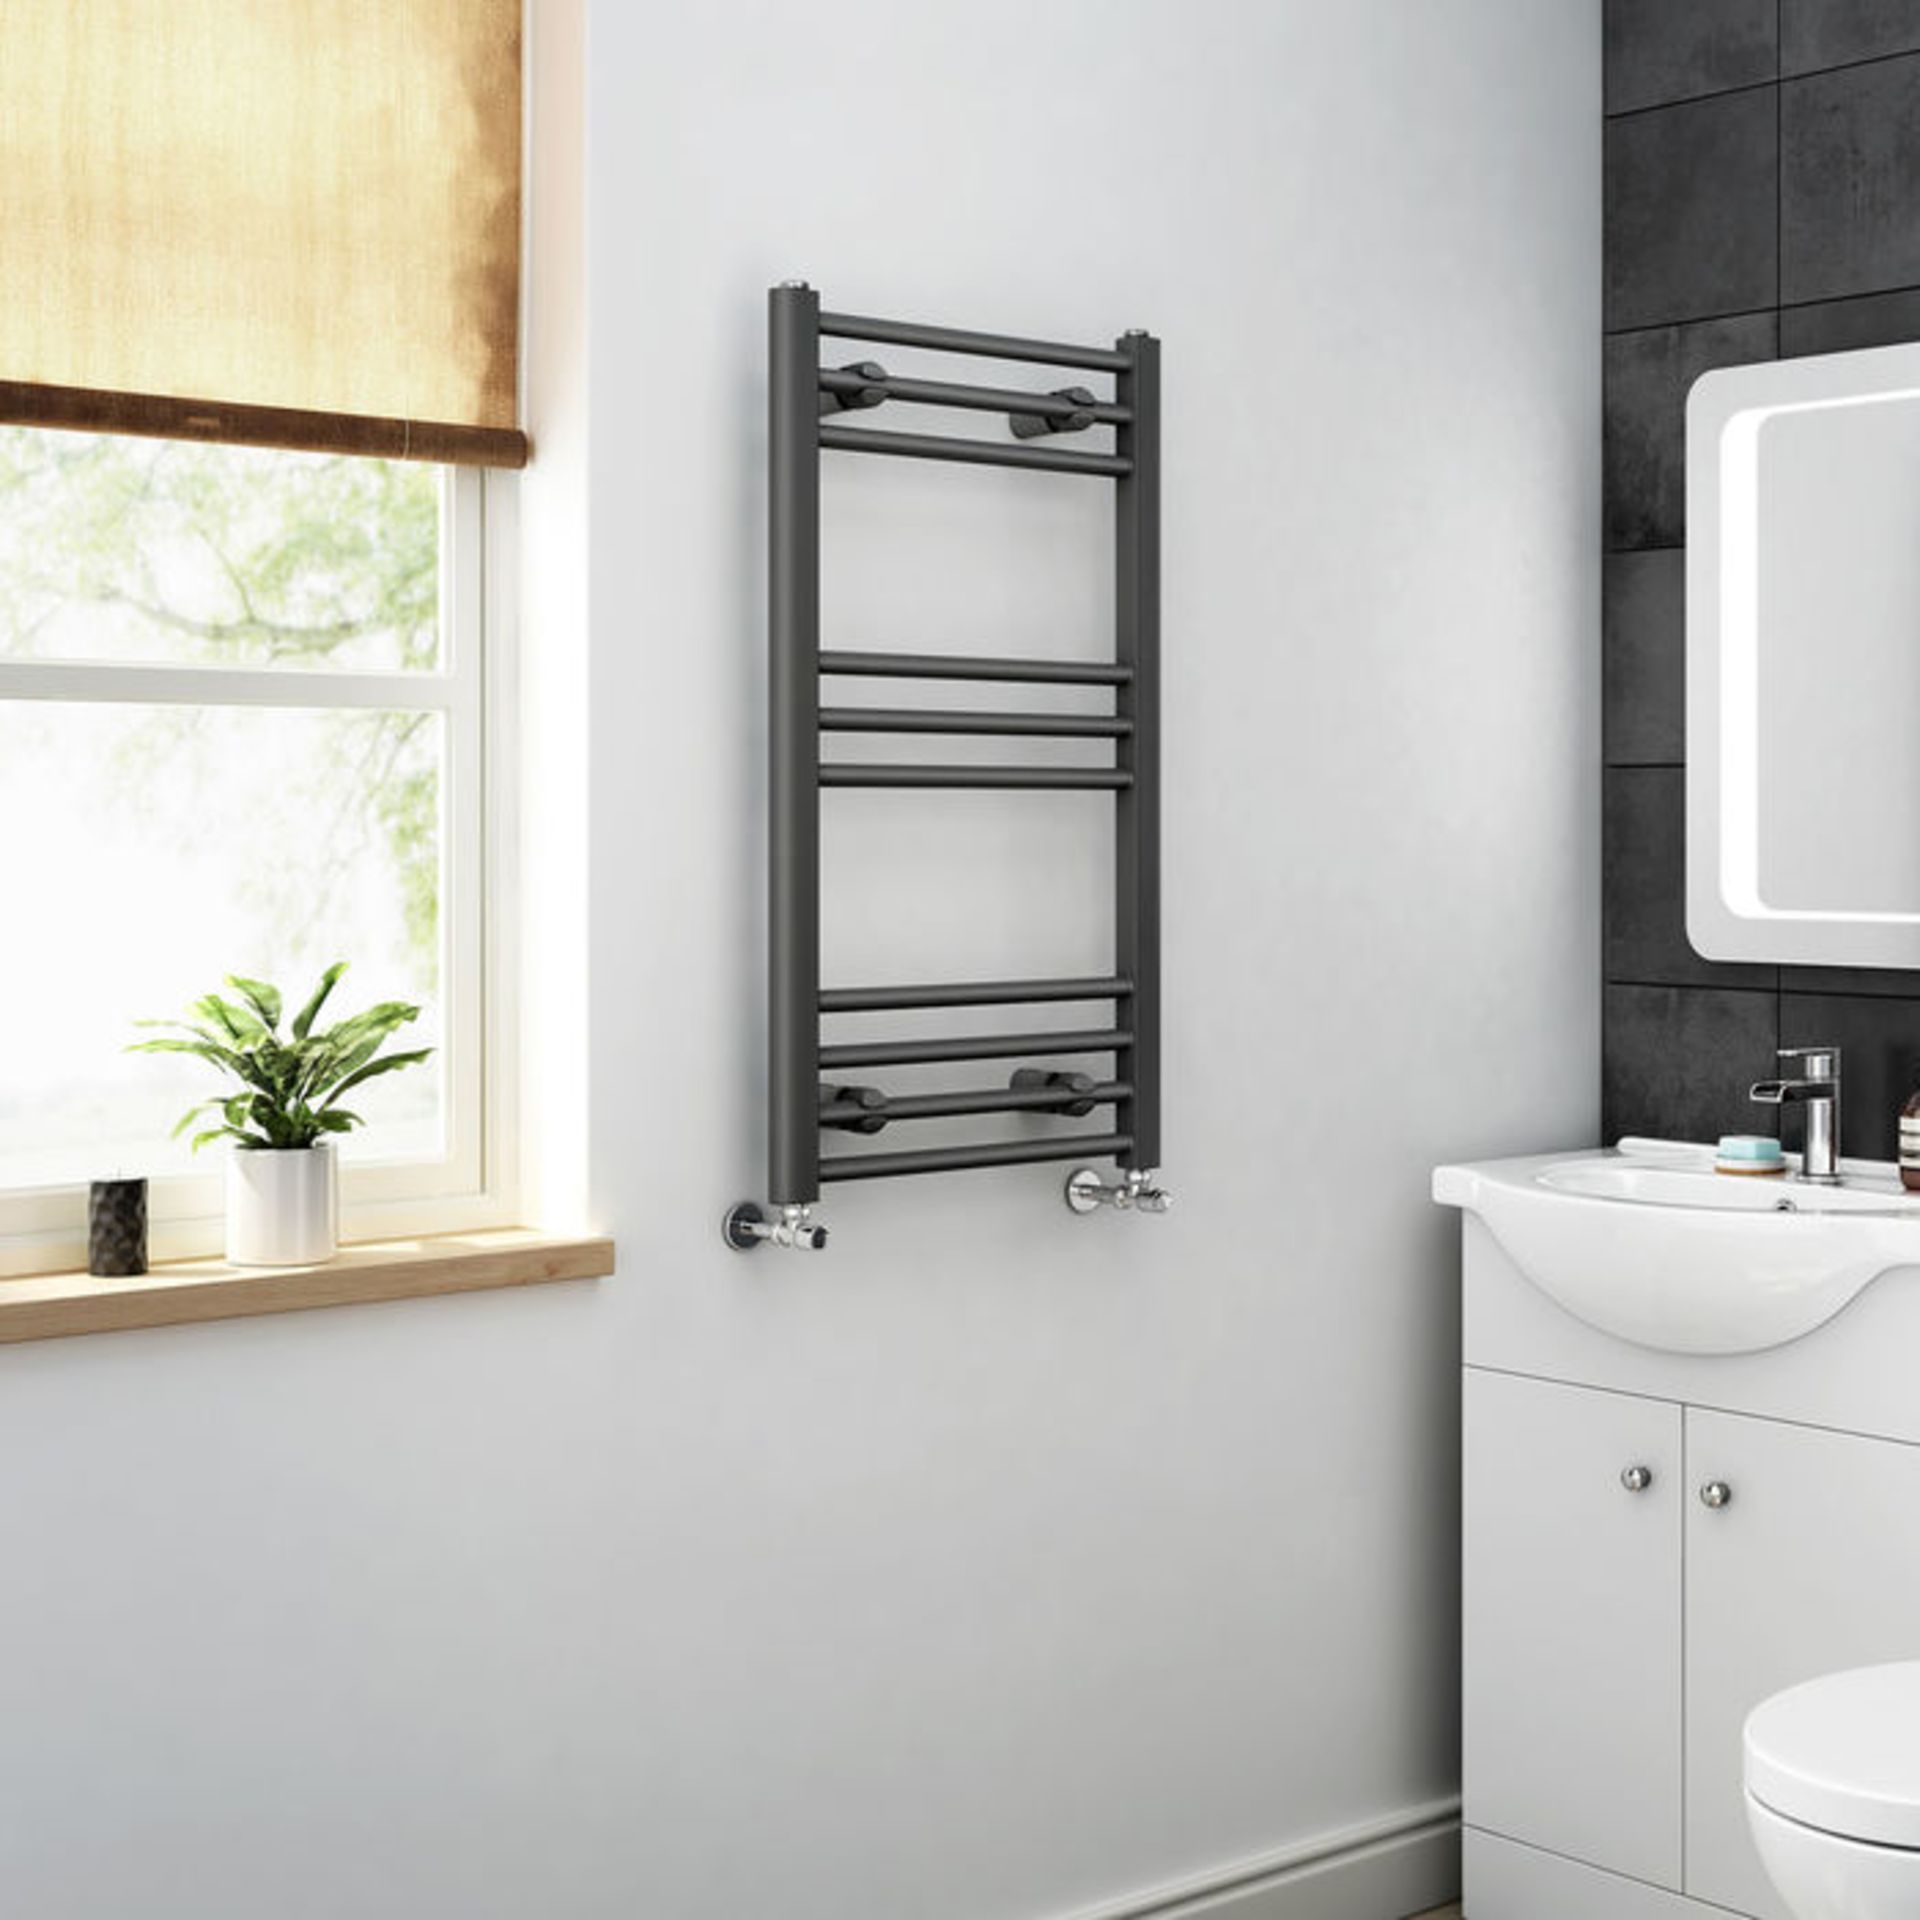 (AH40) 800x450mm - 20mm Tubes - Anthracite Heated Straight Rail Ladder Towel Radiator. Corrosion - Image 2 of 3